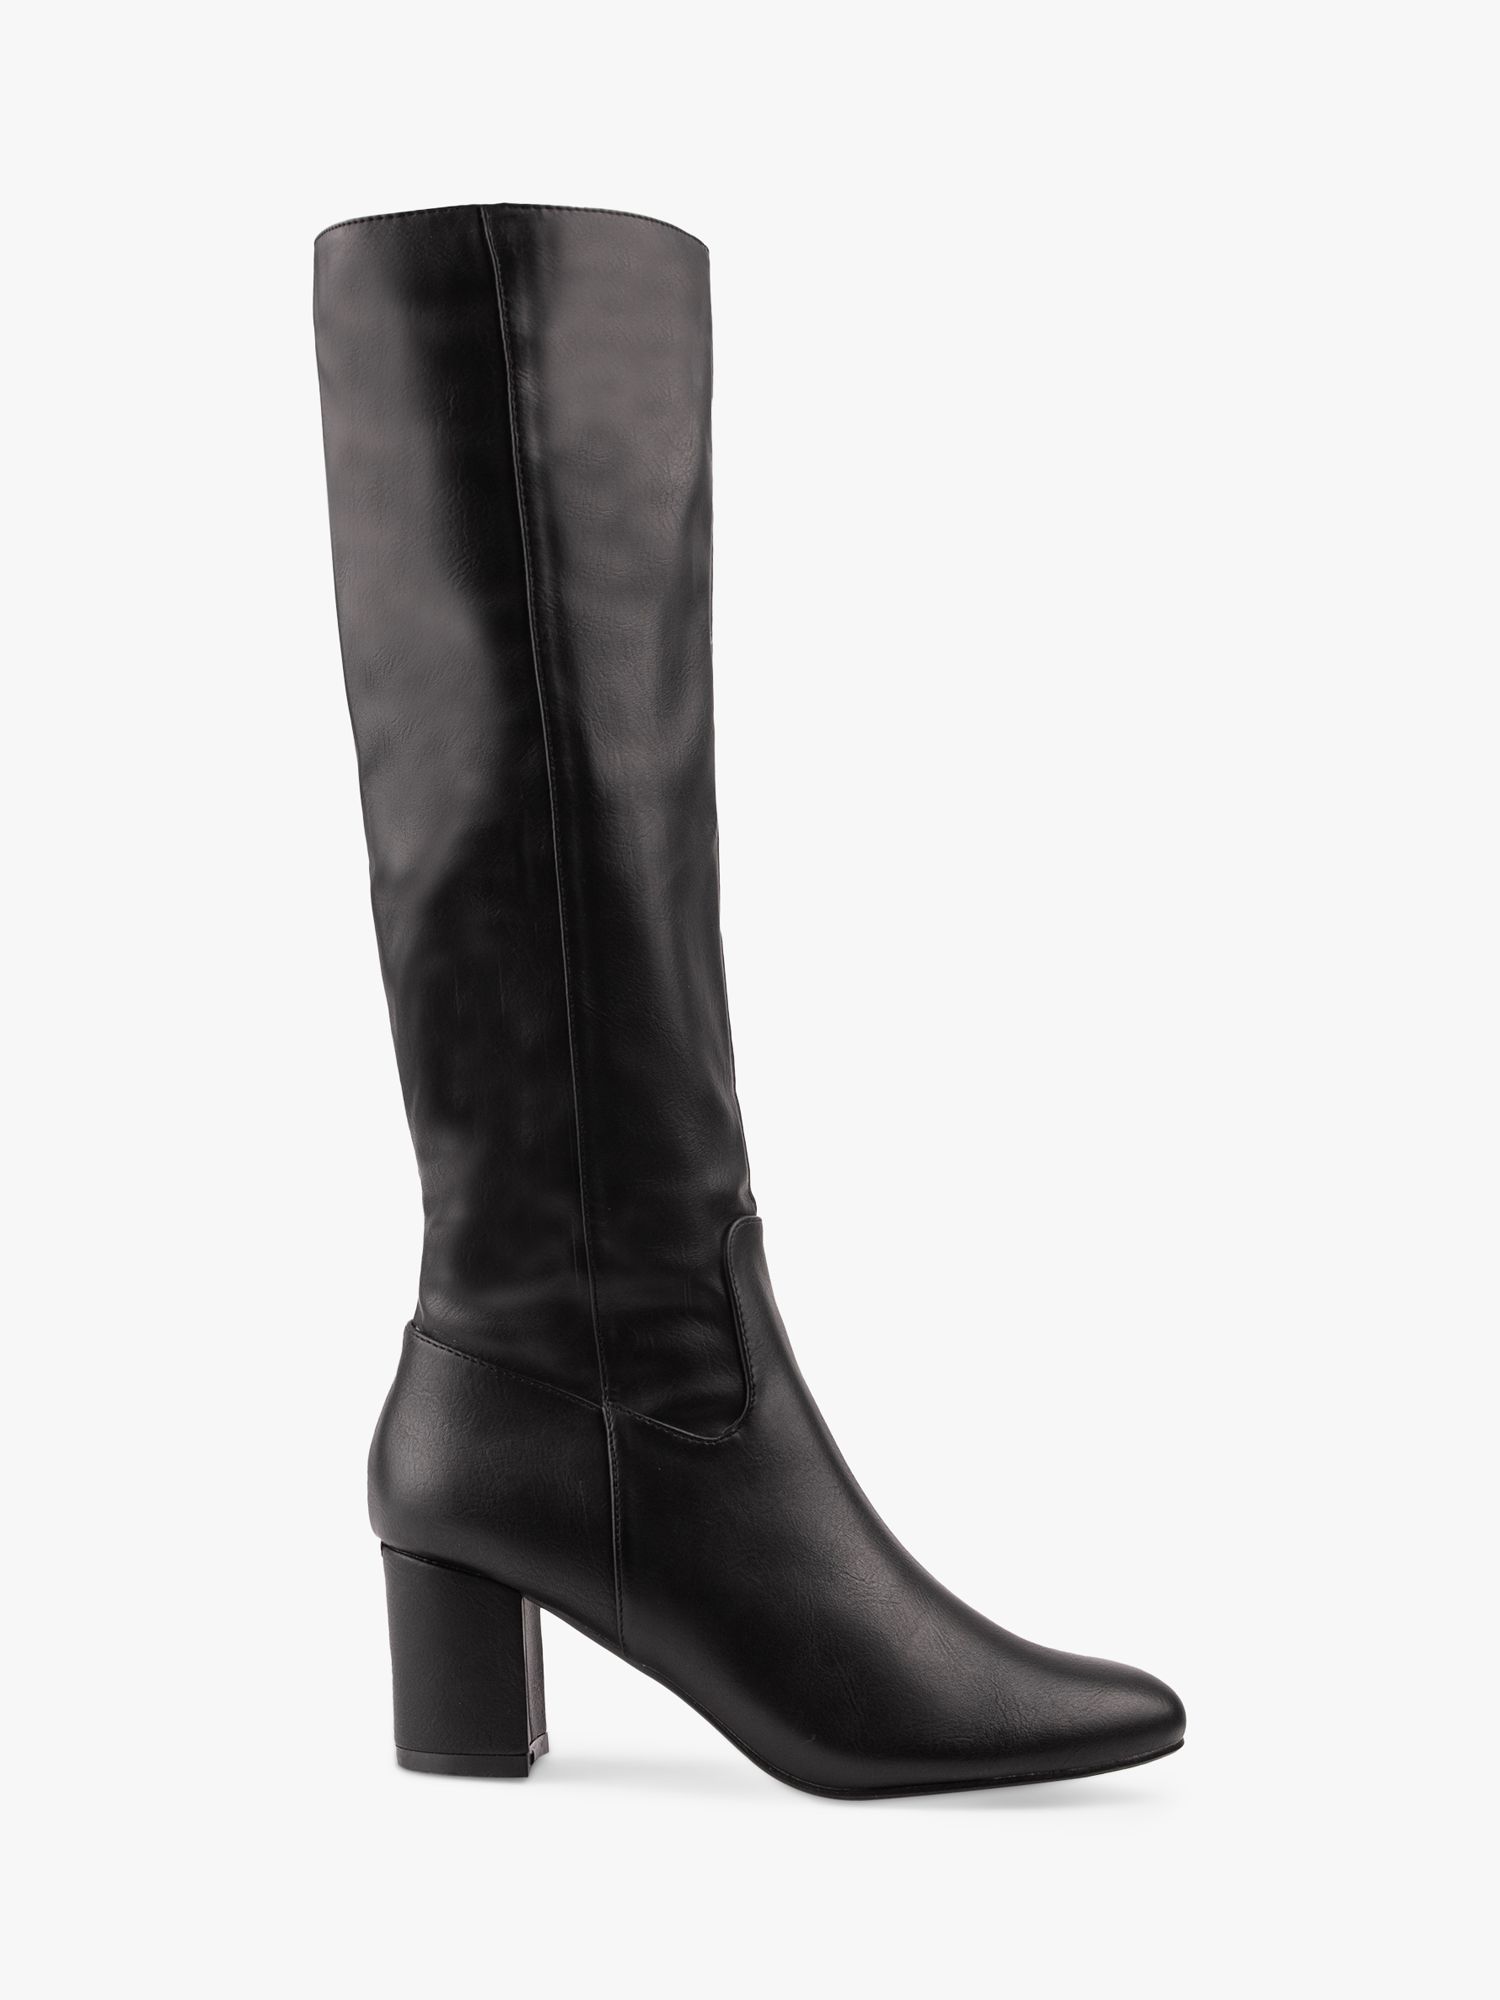 Tall Tales Light Coffee Brown Knee High Boots – Shop the Mint